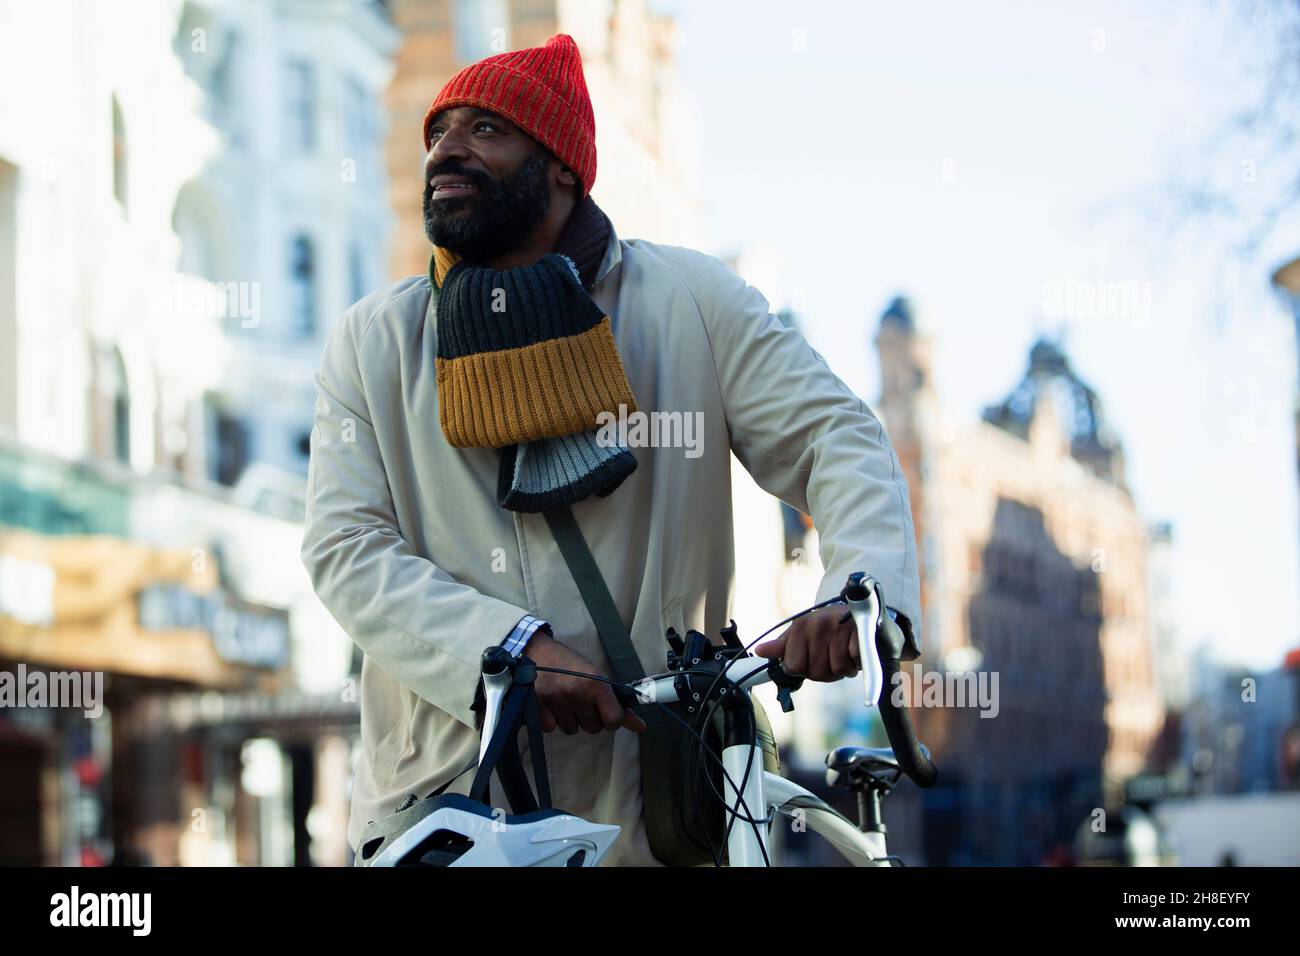 Man in stocking cap and scarf with bicycle on city street Stock Photo